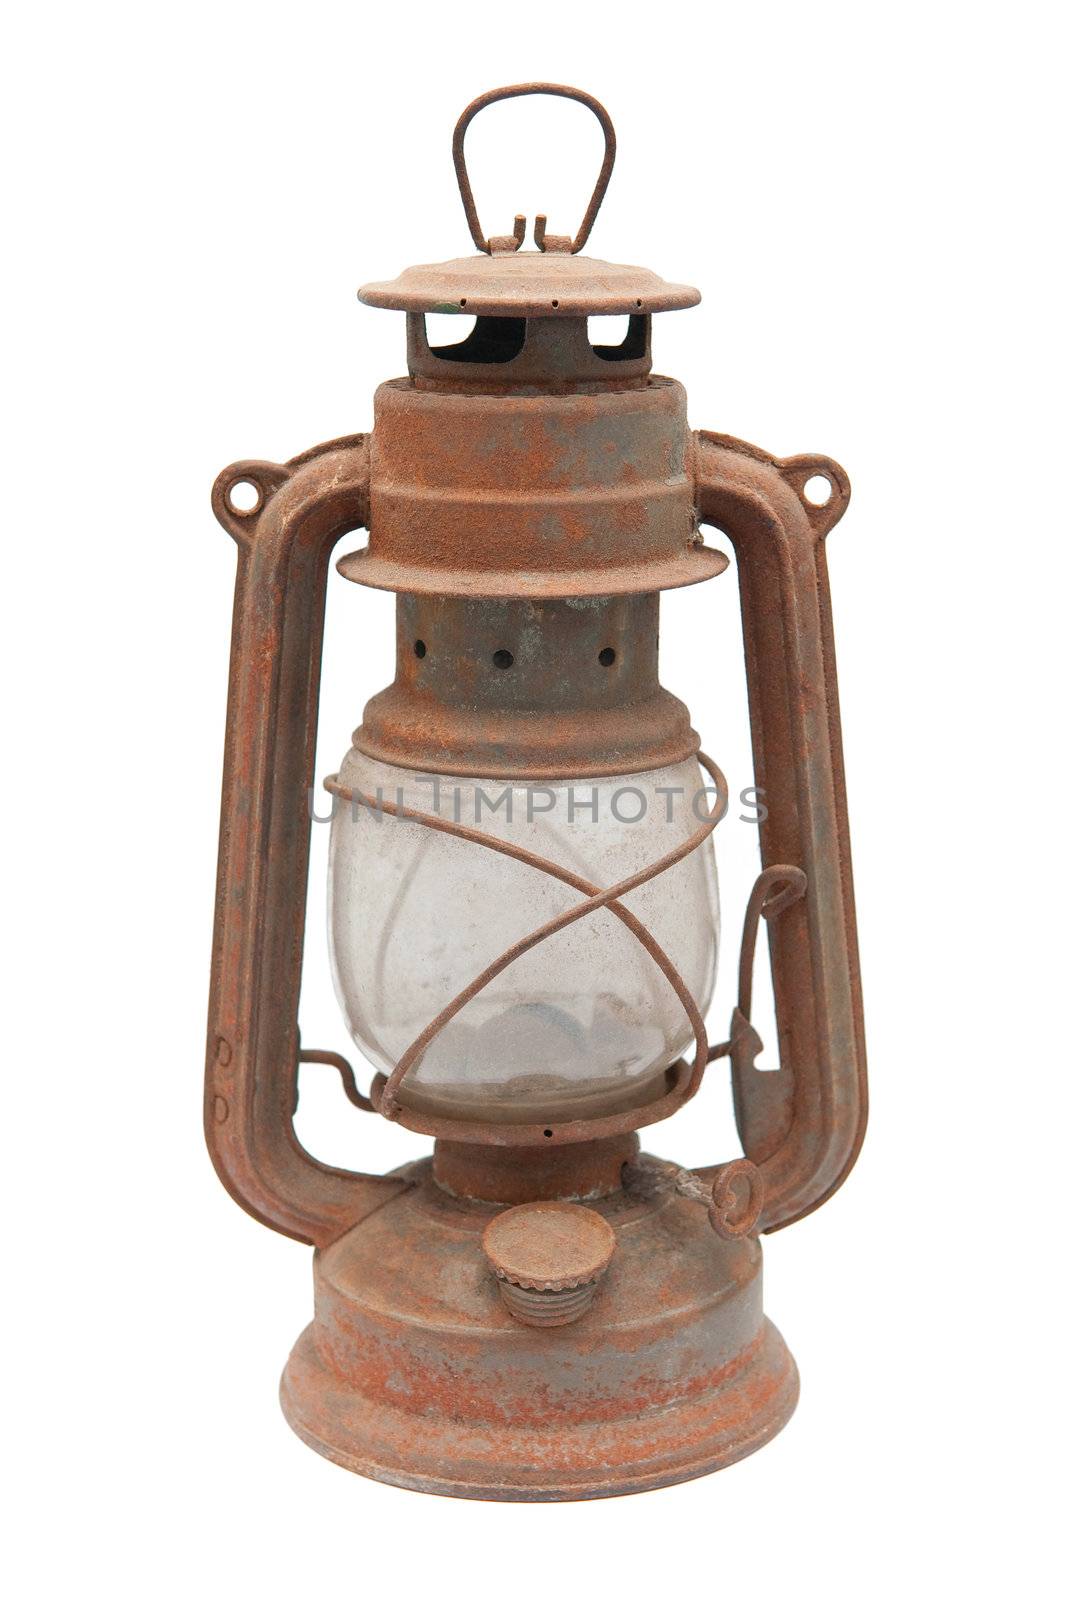 An old paraffin lamp on the white background